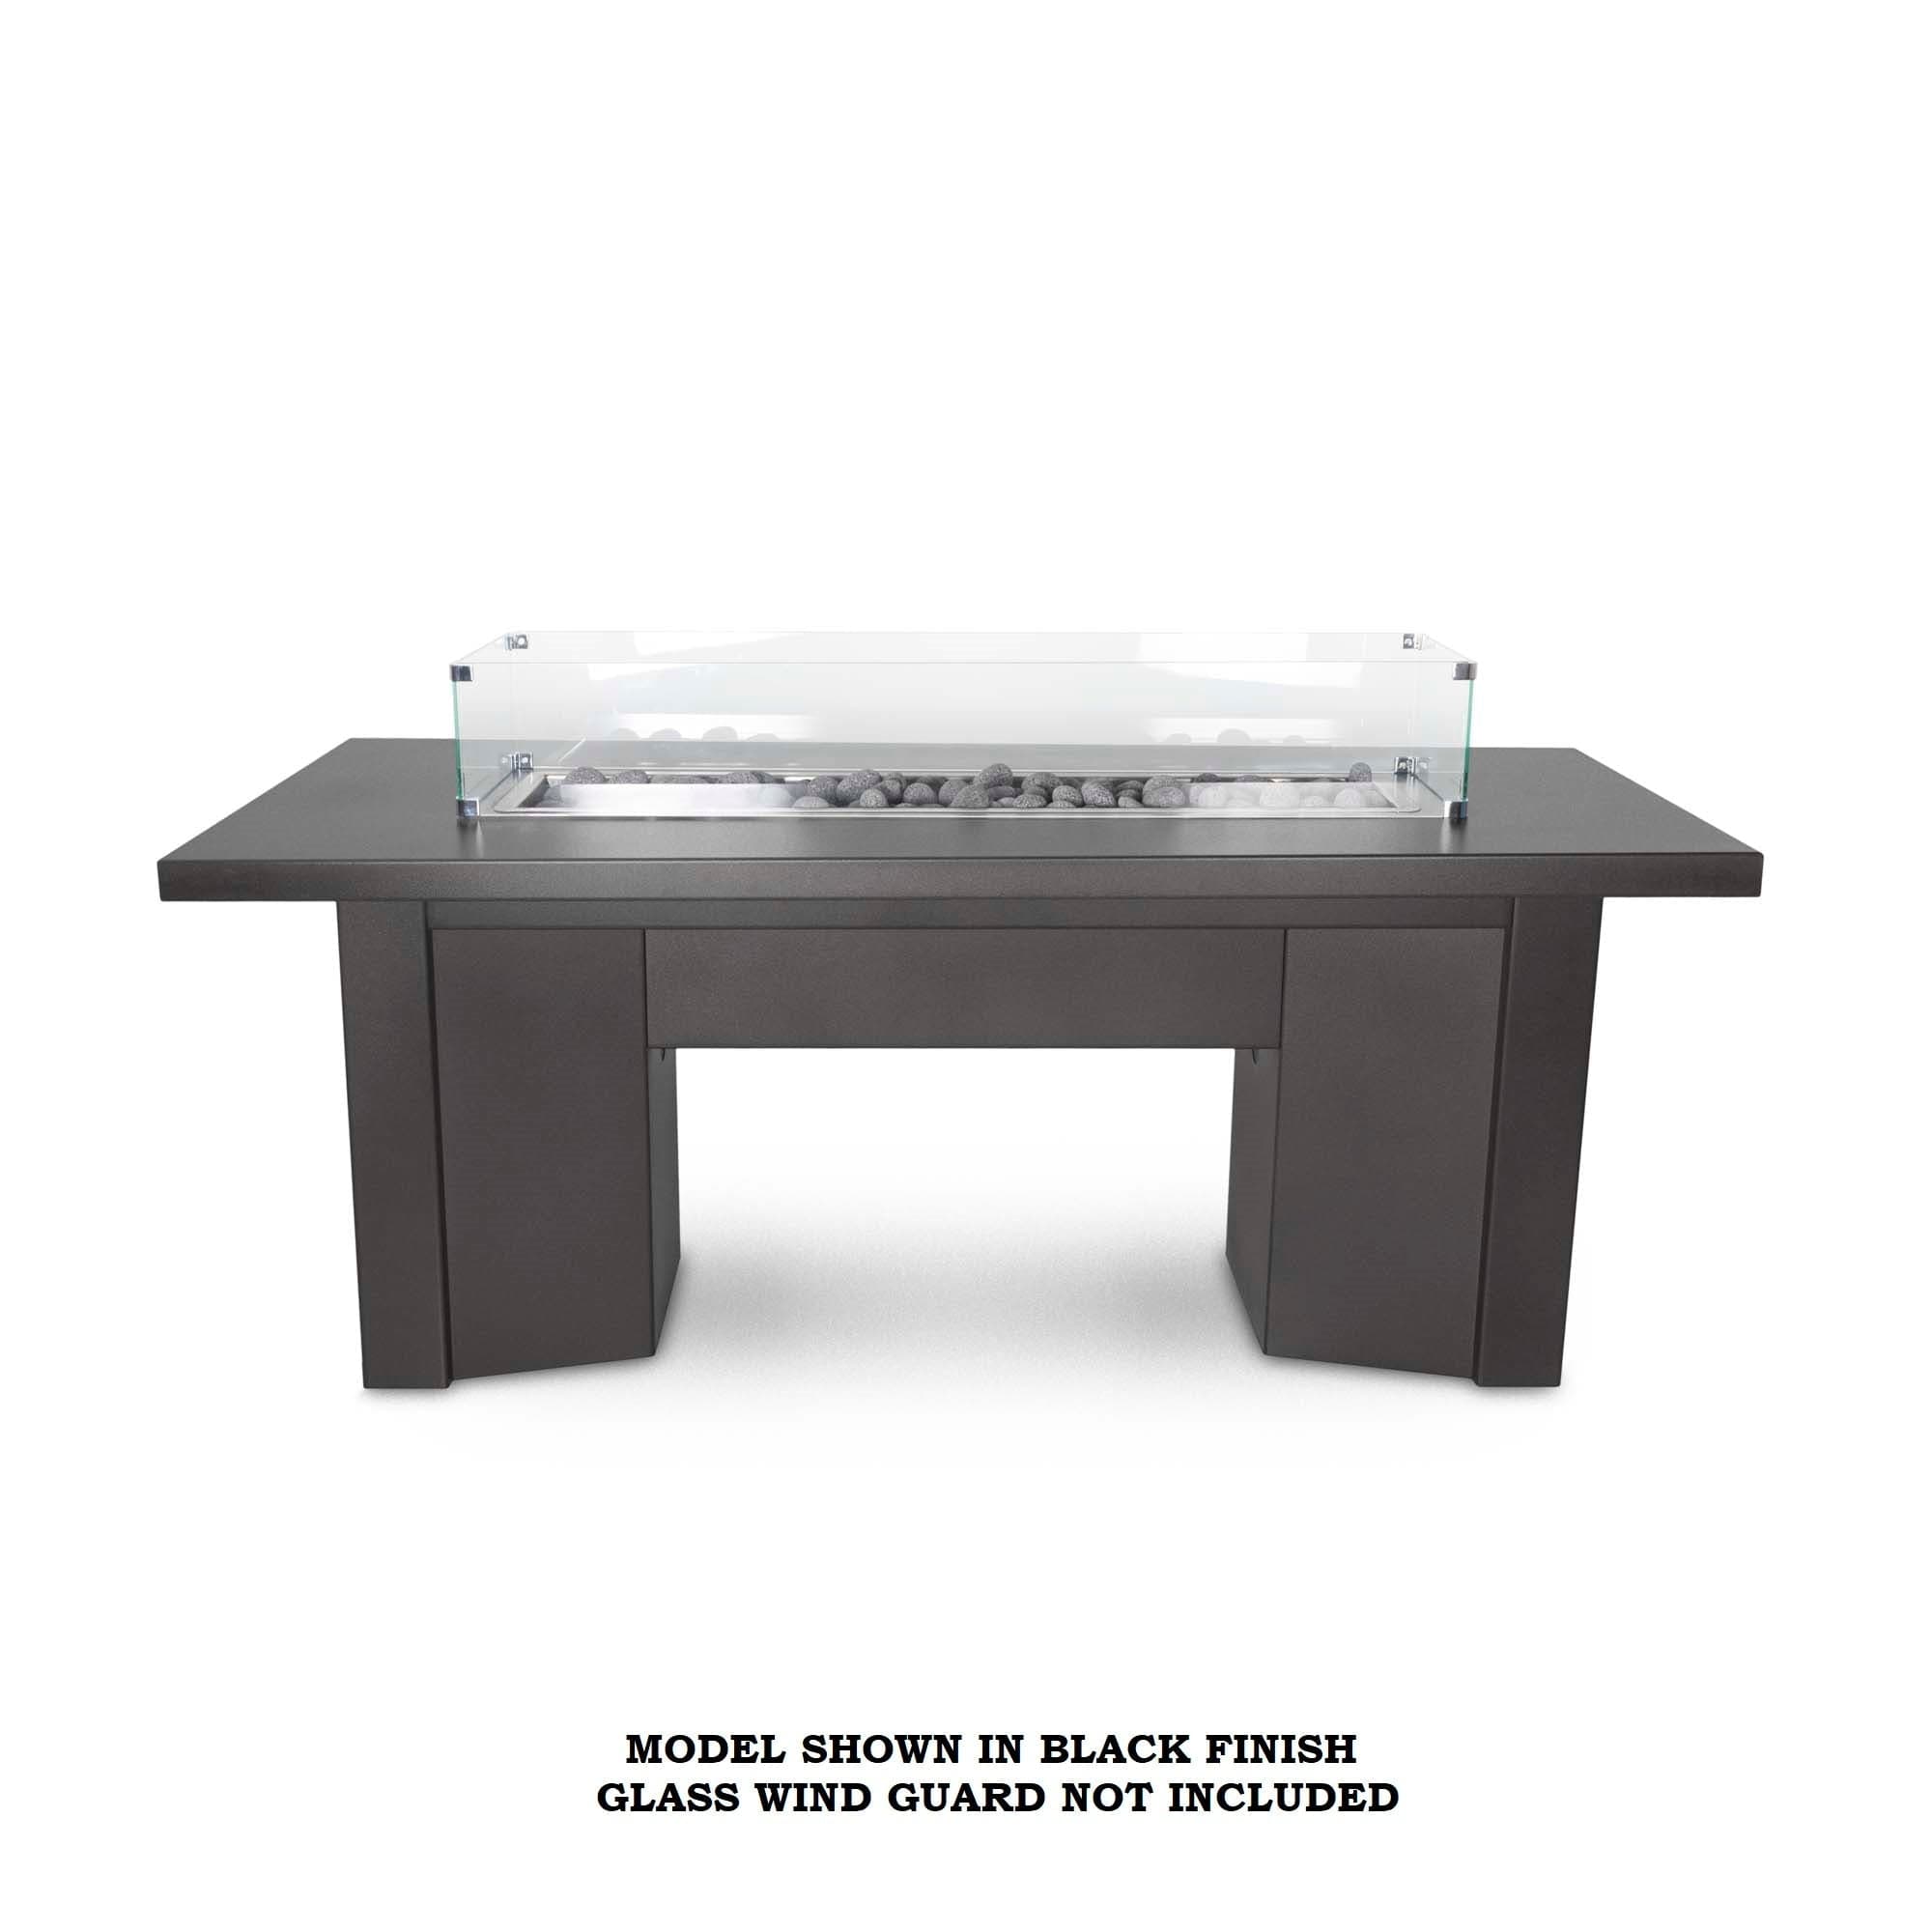 The Outdoor Plus Fire Features Match Lit Ignition / Black (-BLK) / Natural Gas The Outdoor Plus 60" Alameda Linear Powder Coated Rectangle Fire Table / OPT-ALMPC60, OPT-ALMPC60FSML, OPT-ALMPC60FSEN, OPT-ALMPC60E12V, OPT-ALMPC60EKIT